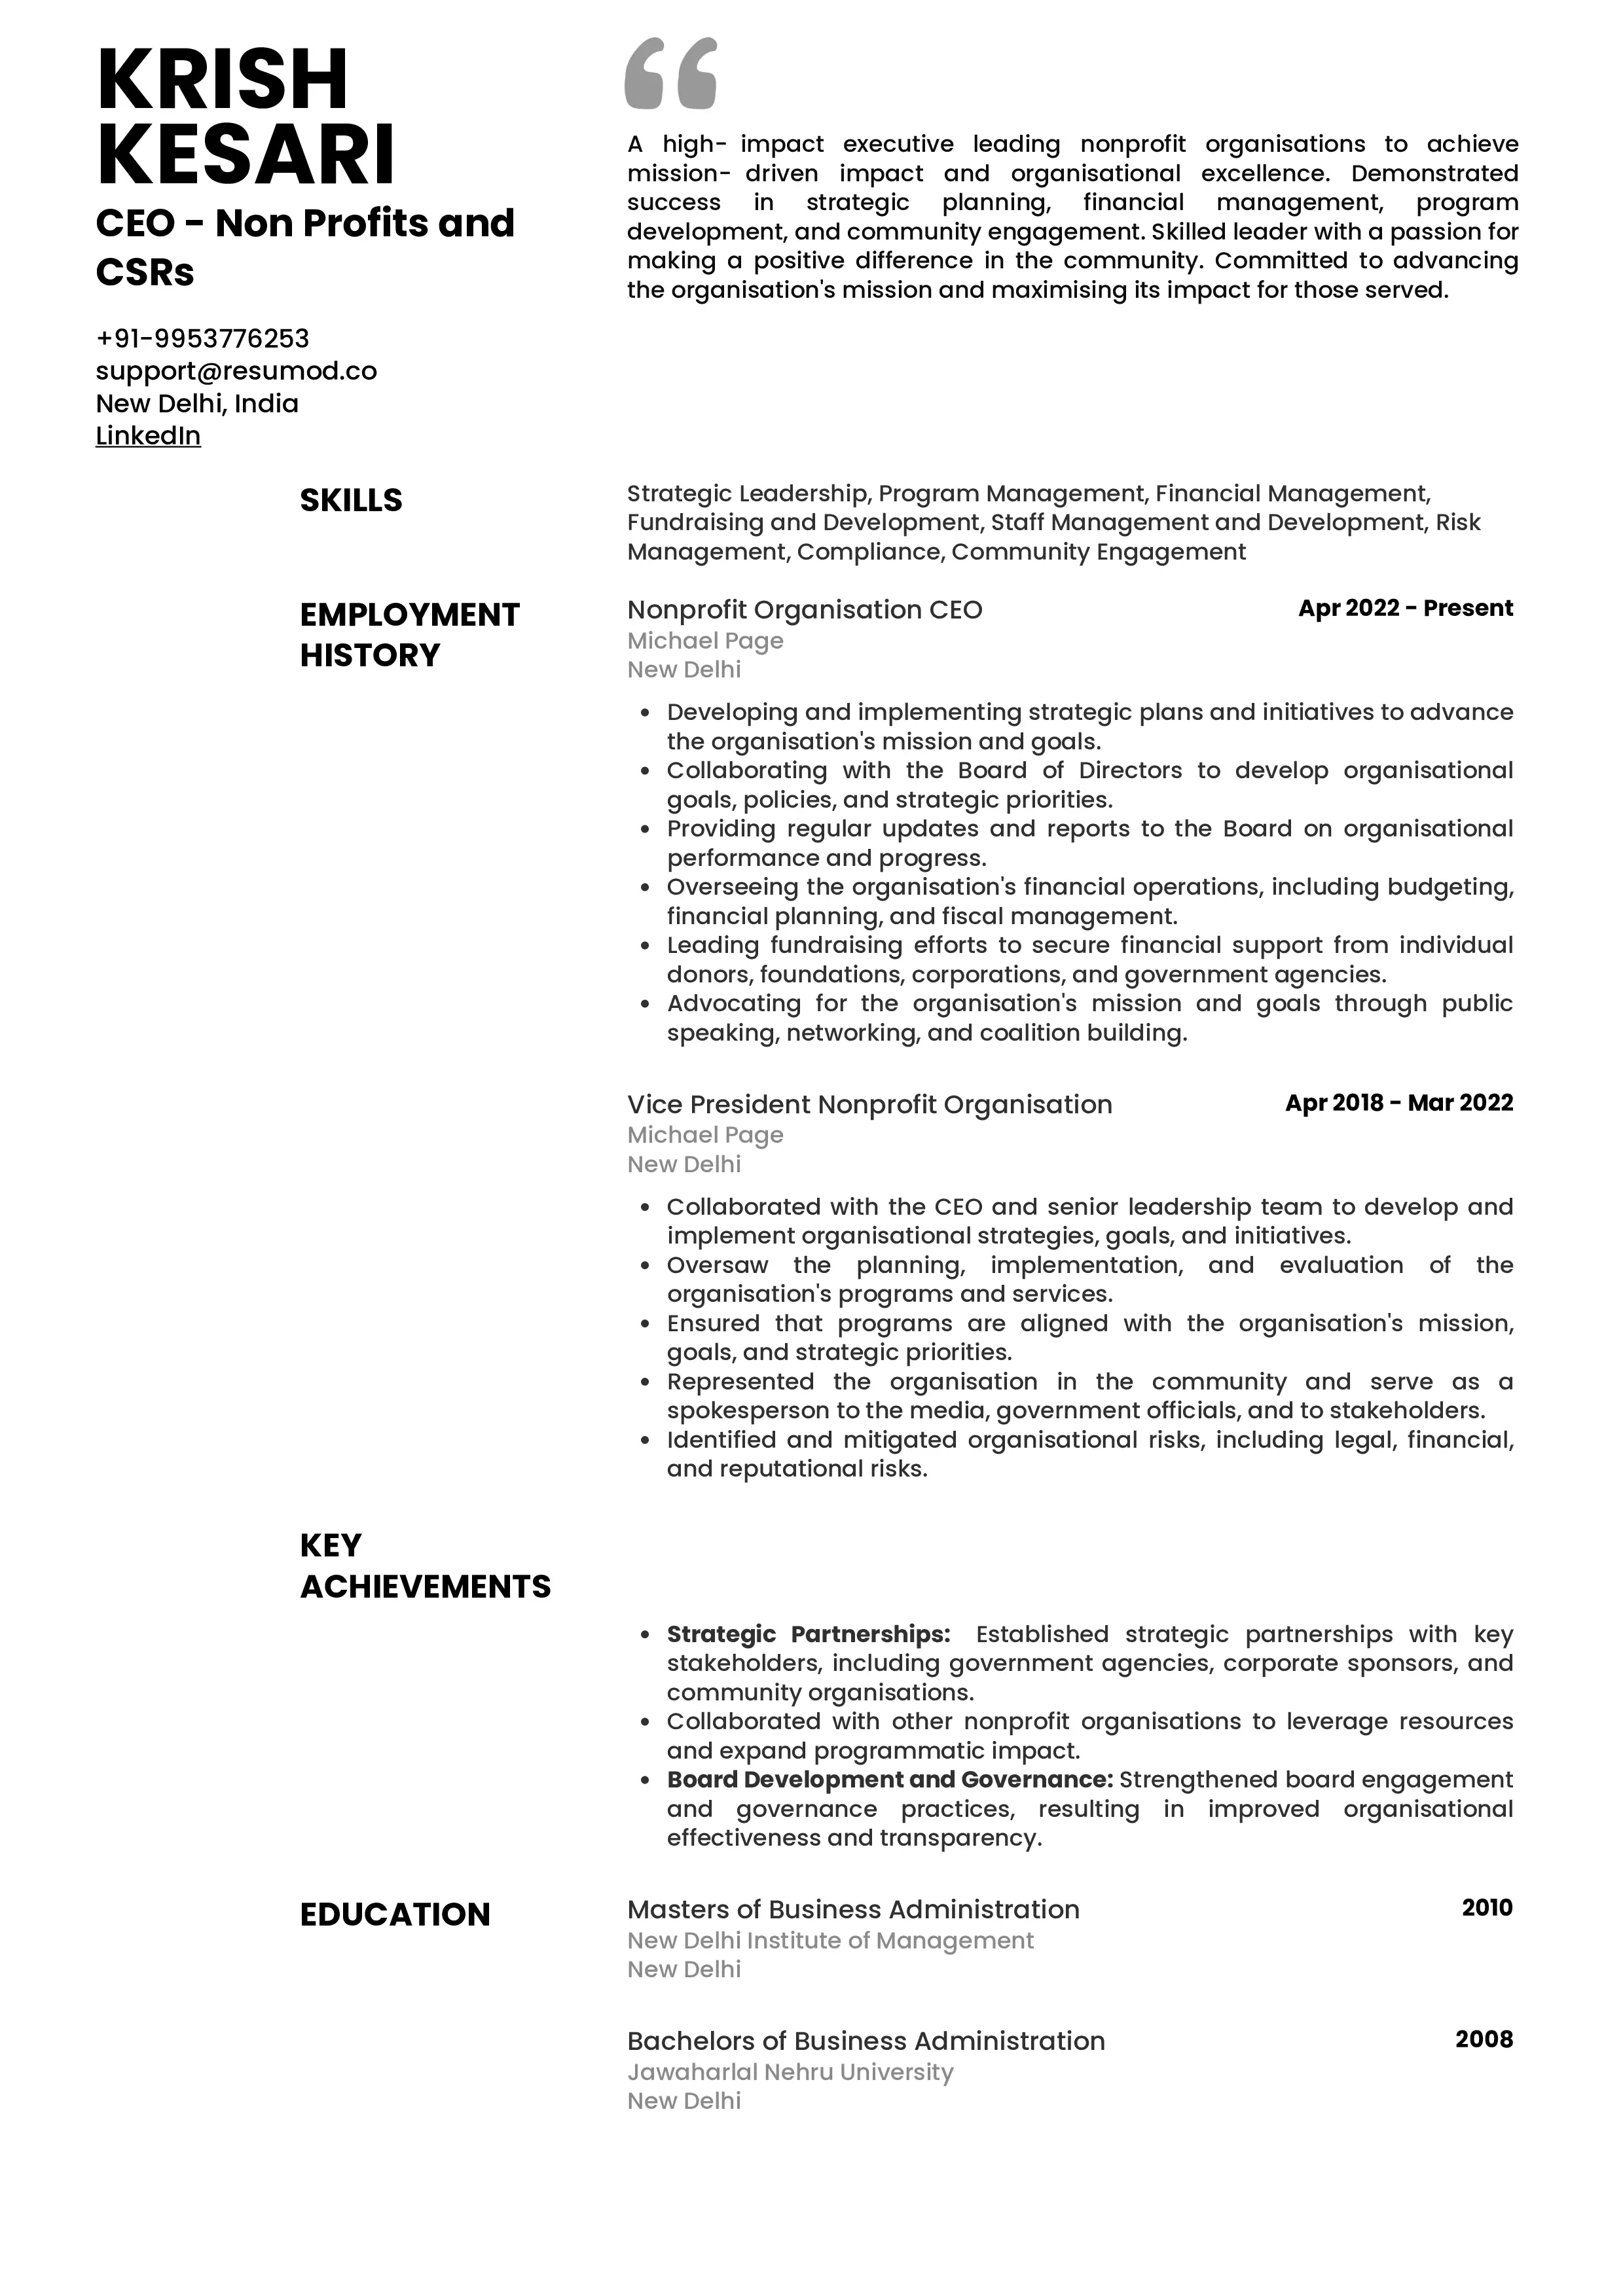 Sample Resume of Non-Profit Organisation CEO | Free Resume Templates & Samples on Resumod.co